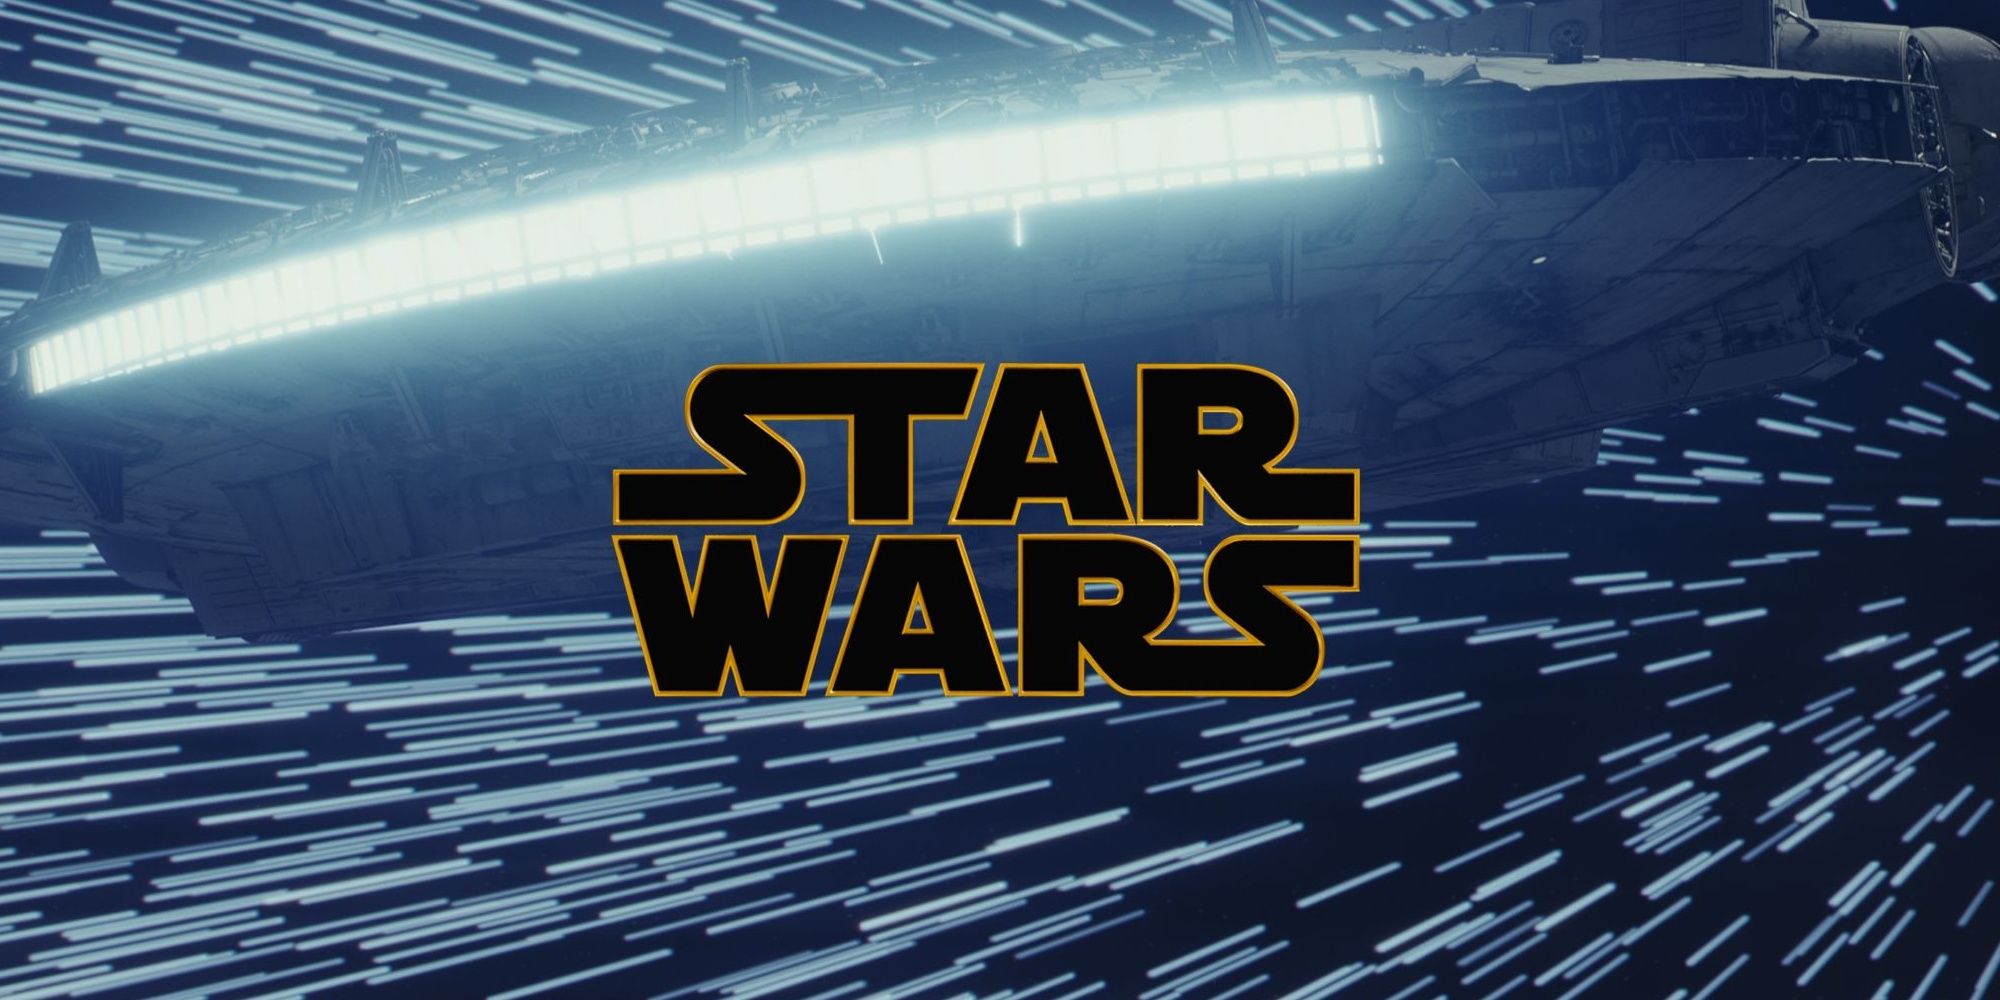 An image of the Millennium Falcon in hyperspace is behind the Star Wars logo, outlined in yellow